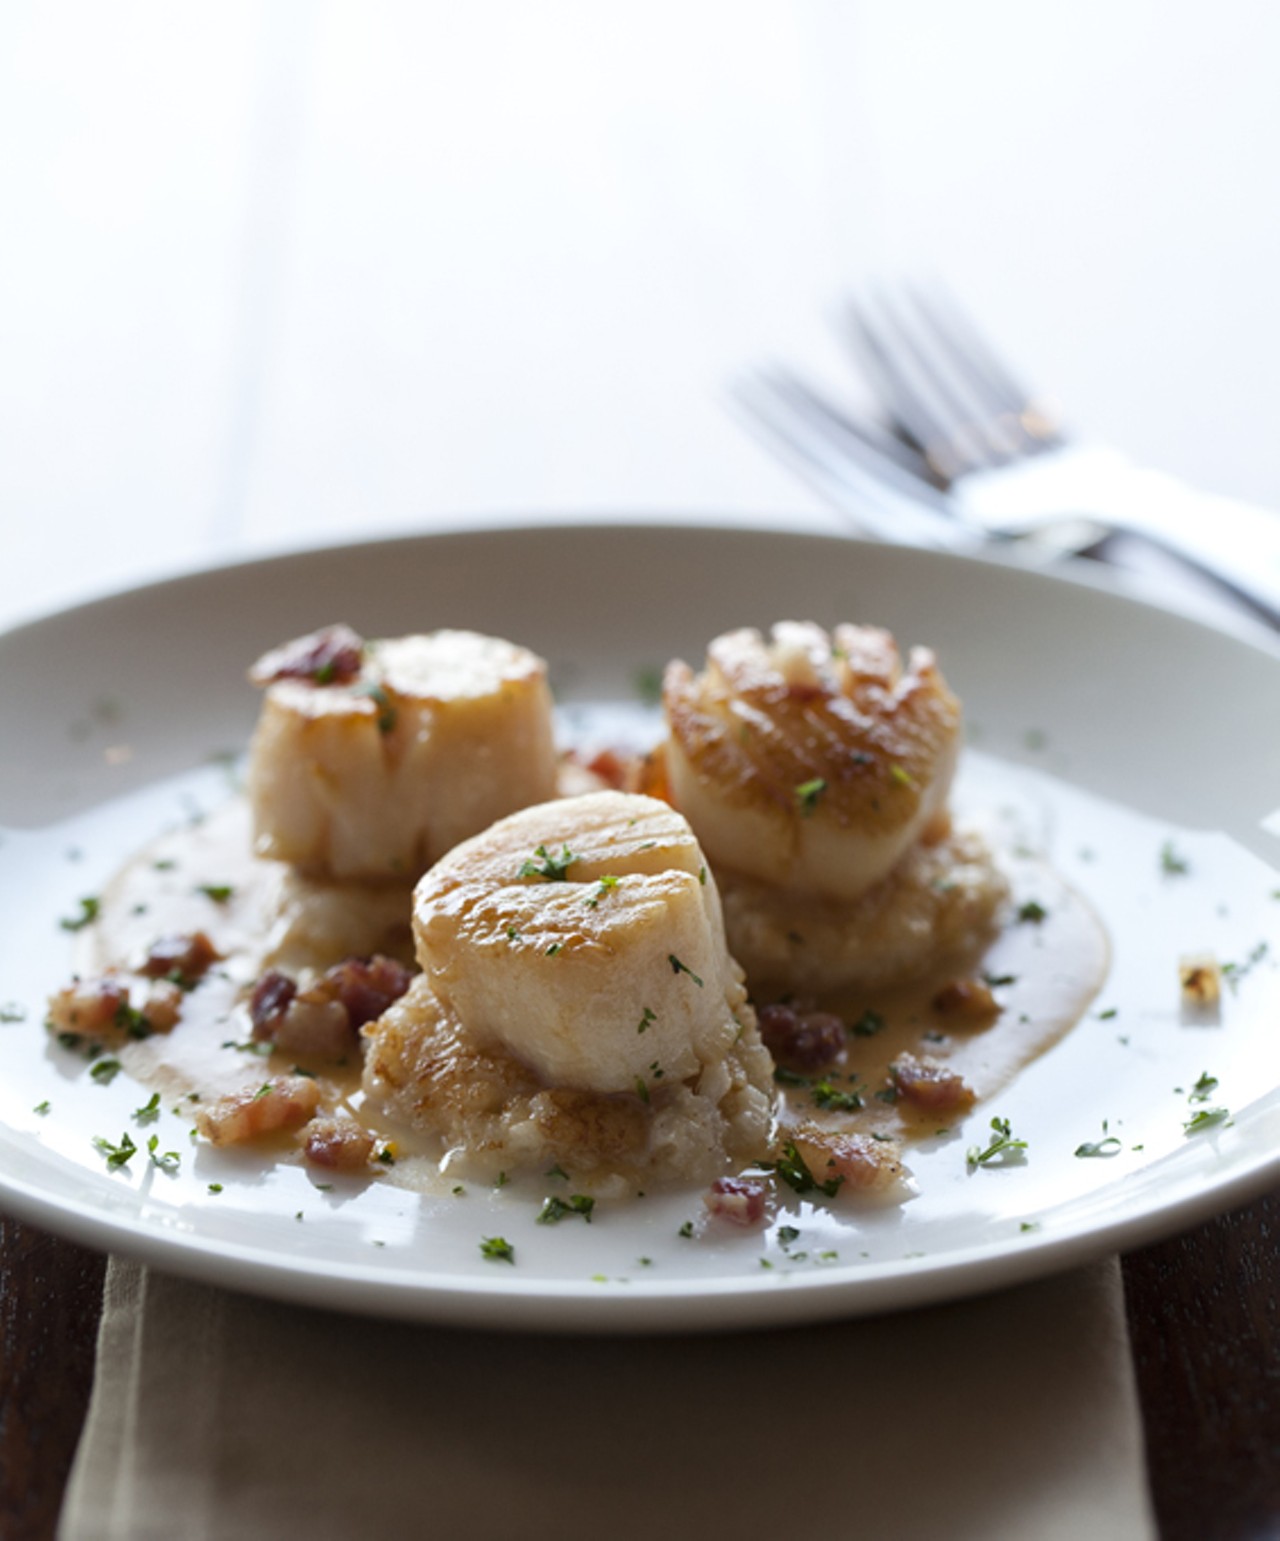 Chardonnay Seared Scallops on rosemary risotto cakes with butternut-maple puree and pancetta.